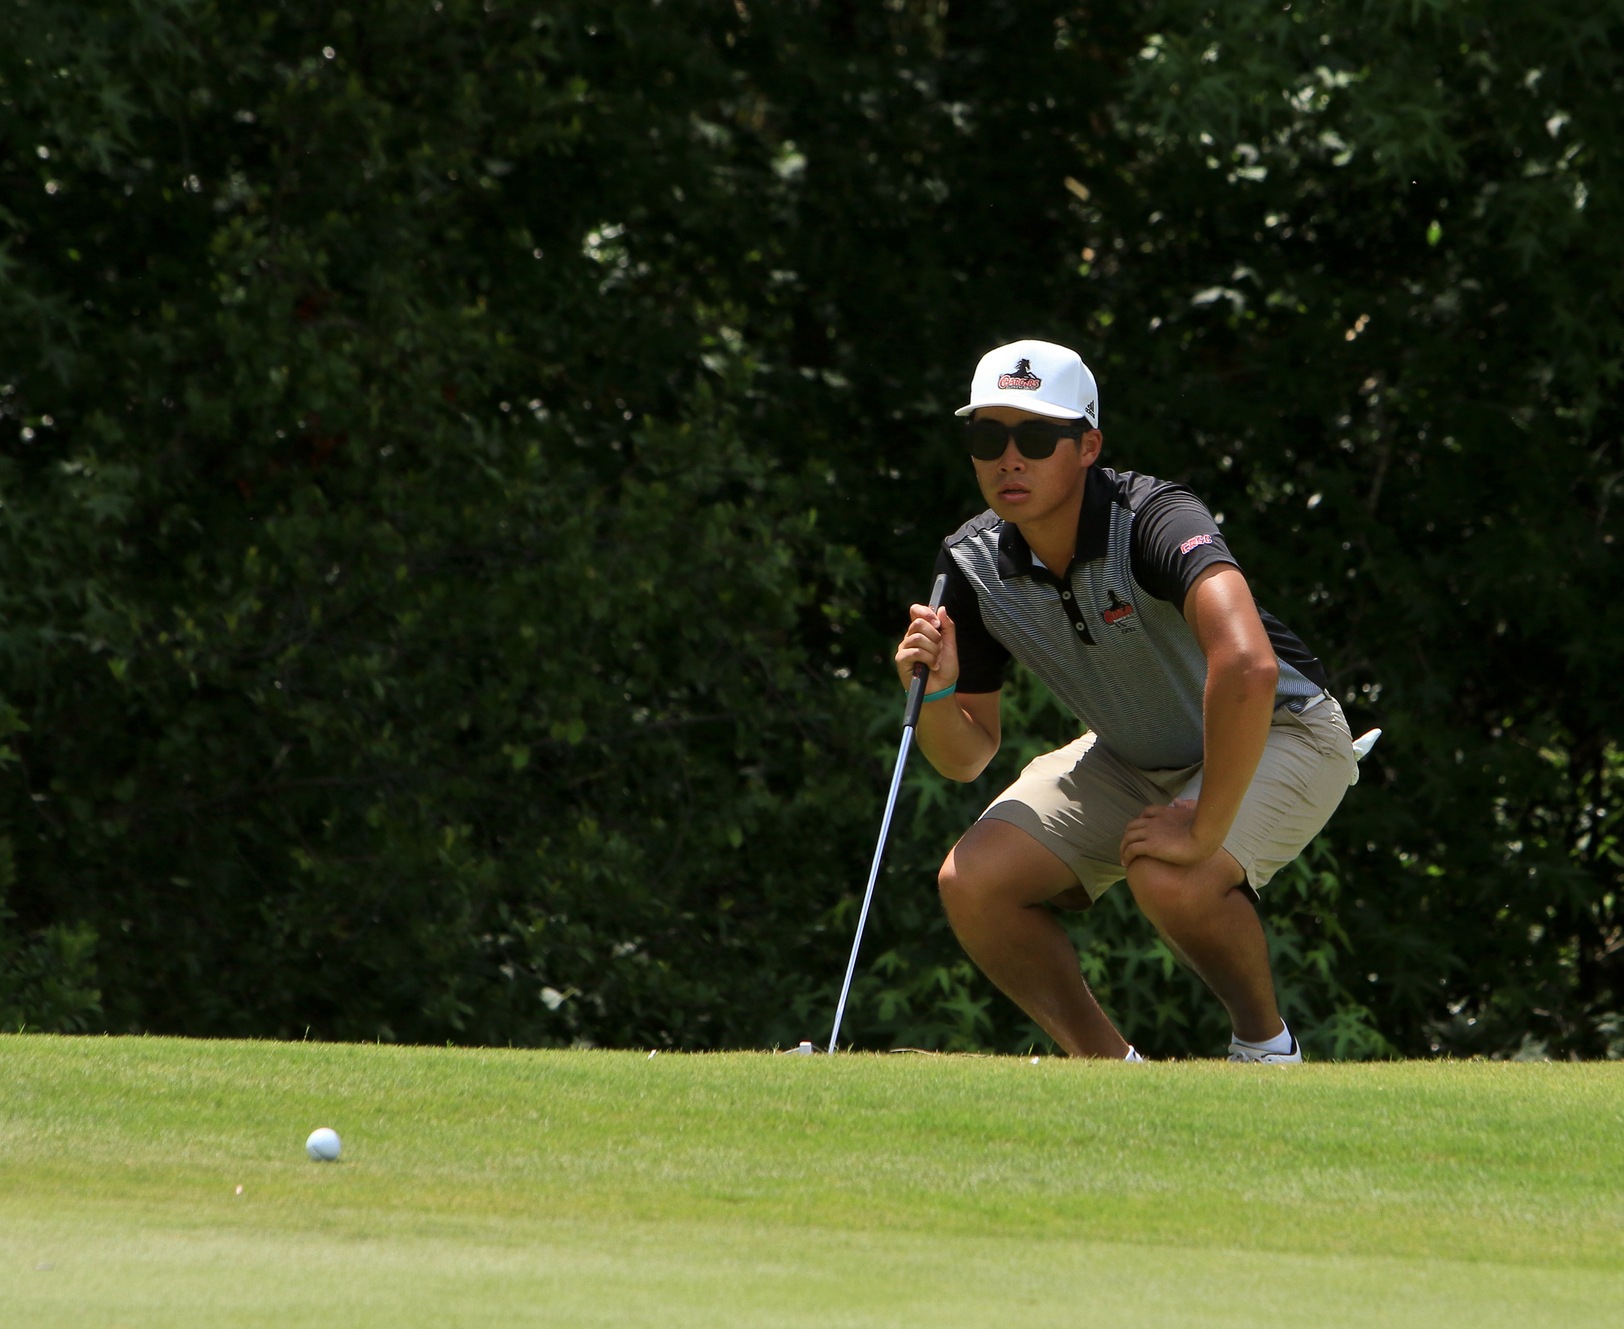 CHARGERS IMPROVE ON DAY TWO OF NCAA DIVISION II GOLF CHAMPIONSHIPS